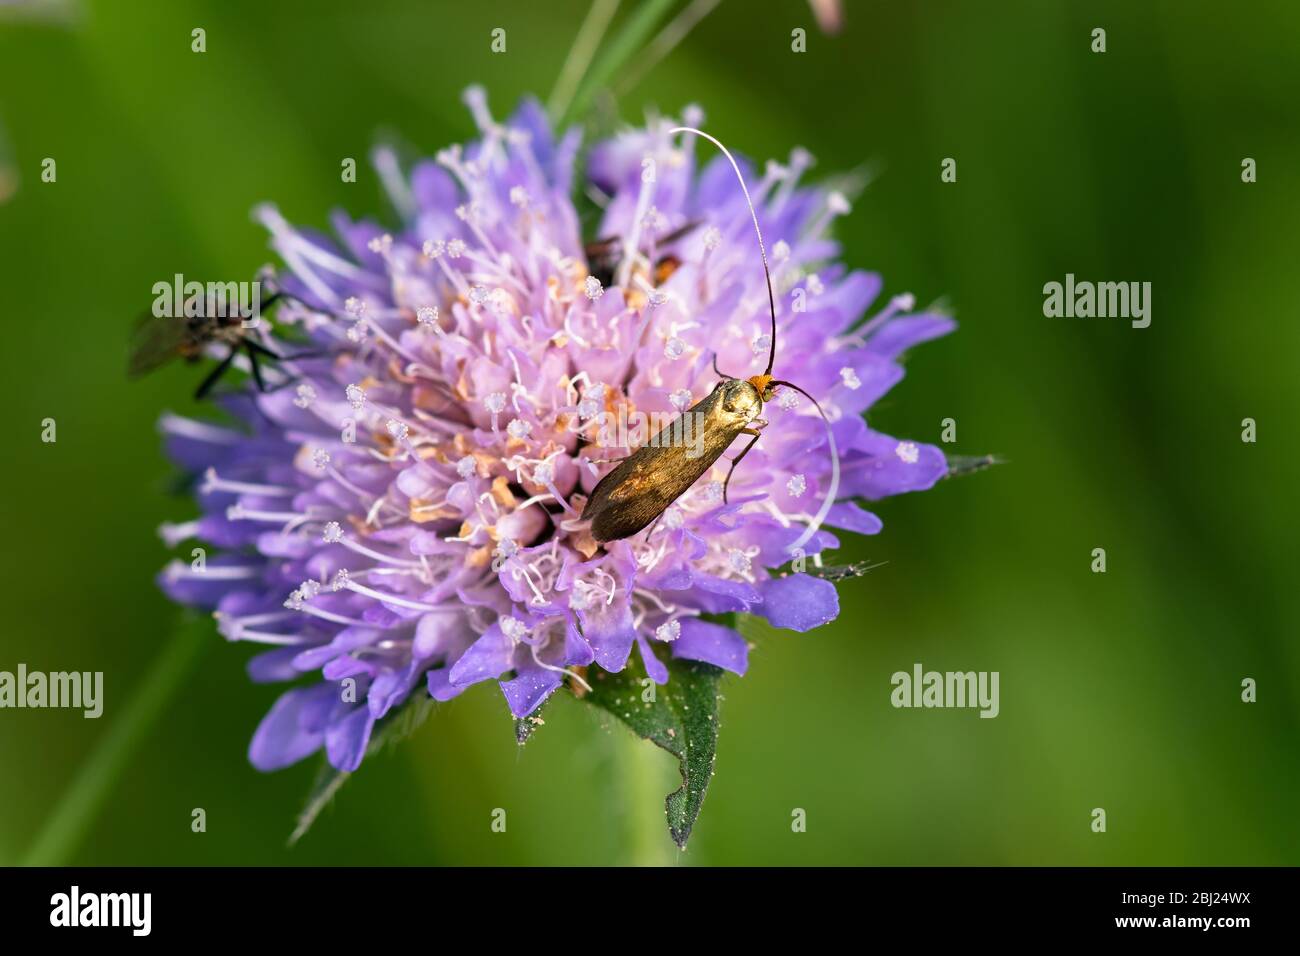 Close-up of a golden insect on purple flower Stock Photo